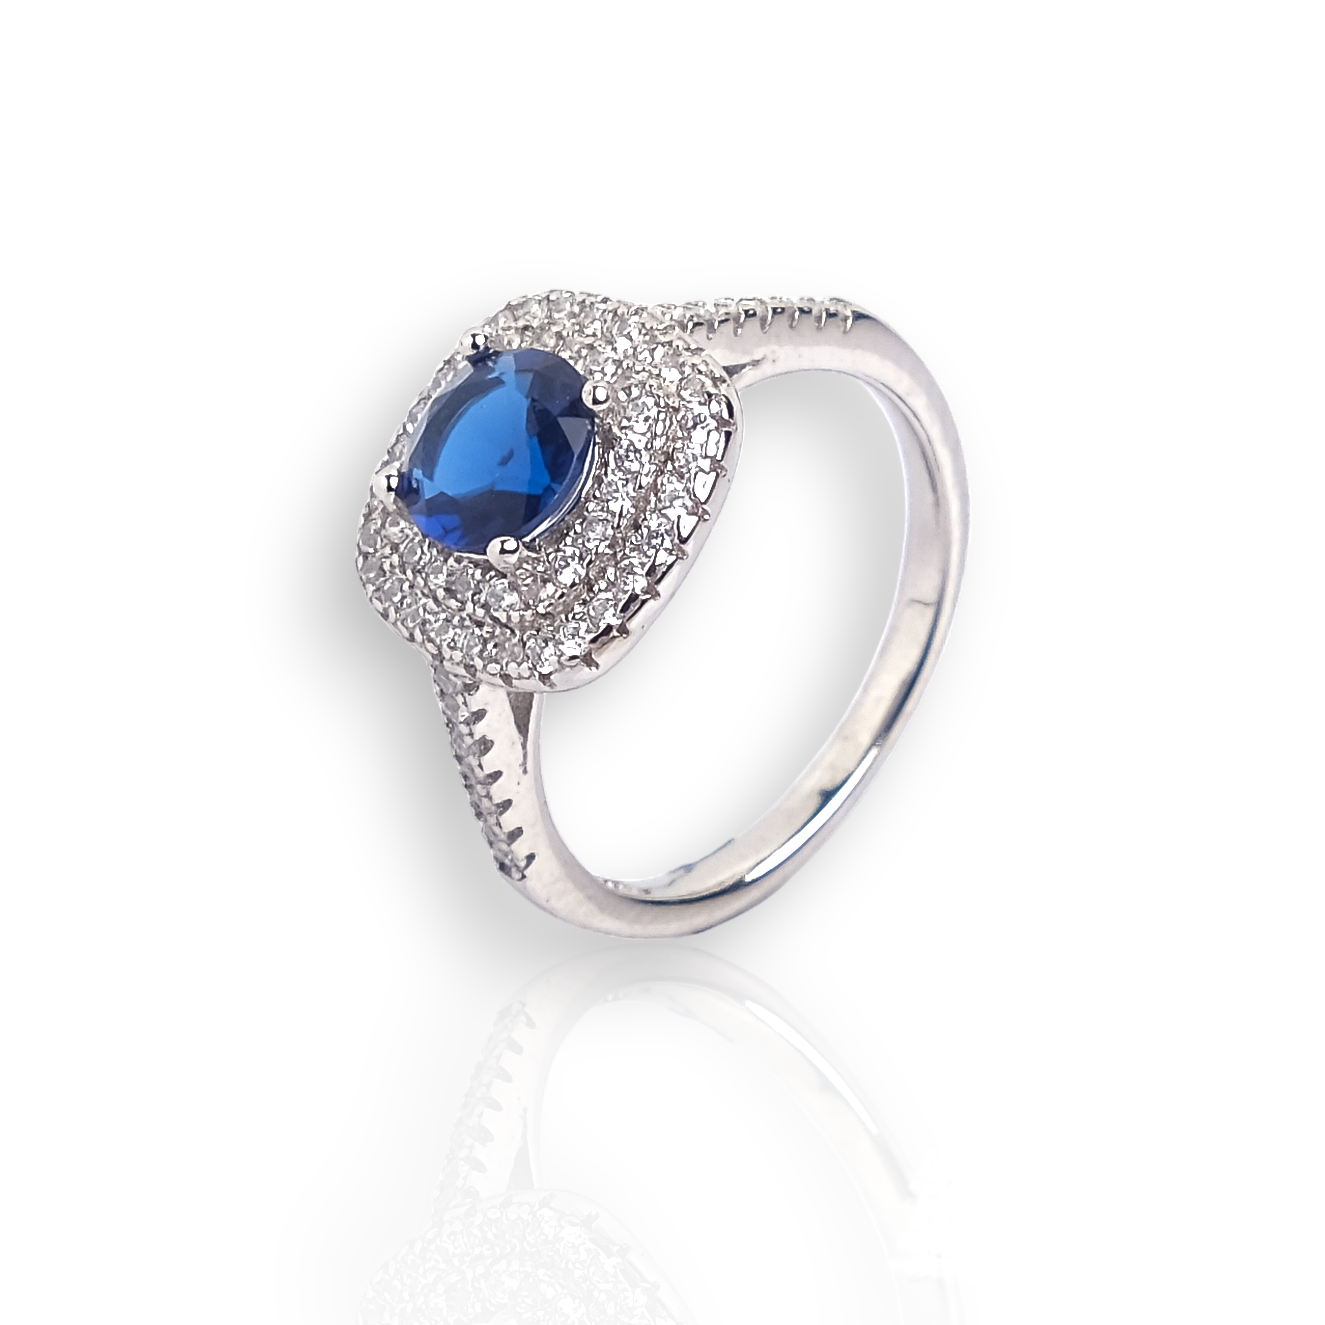 Blue Sapphire Ring Sterling Silver Oval Cut